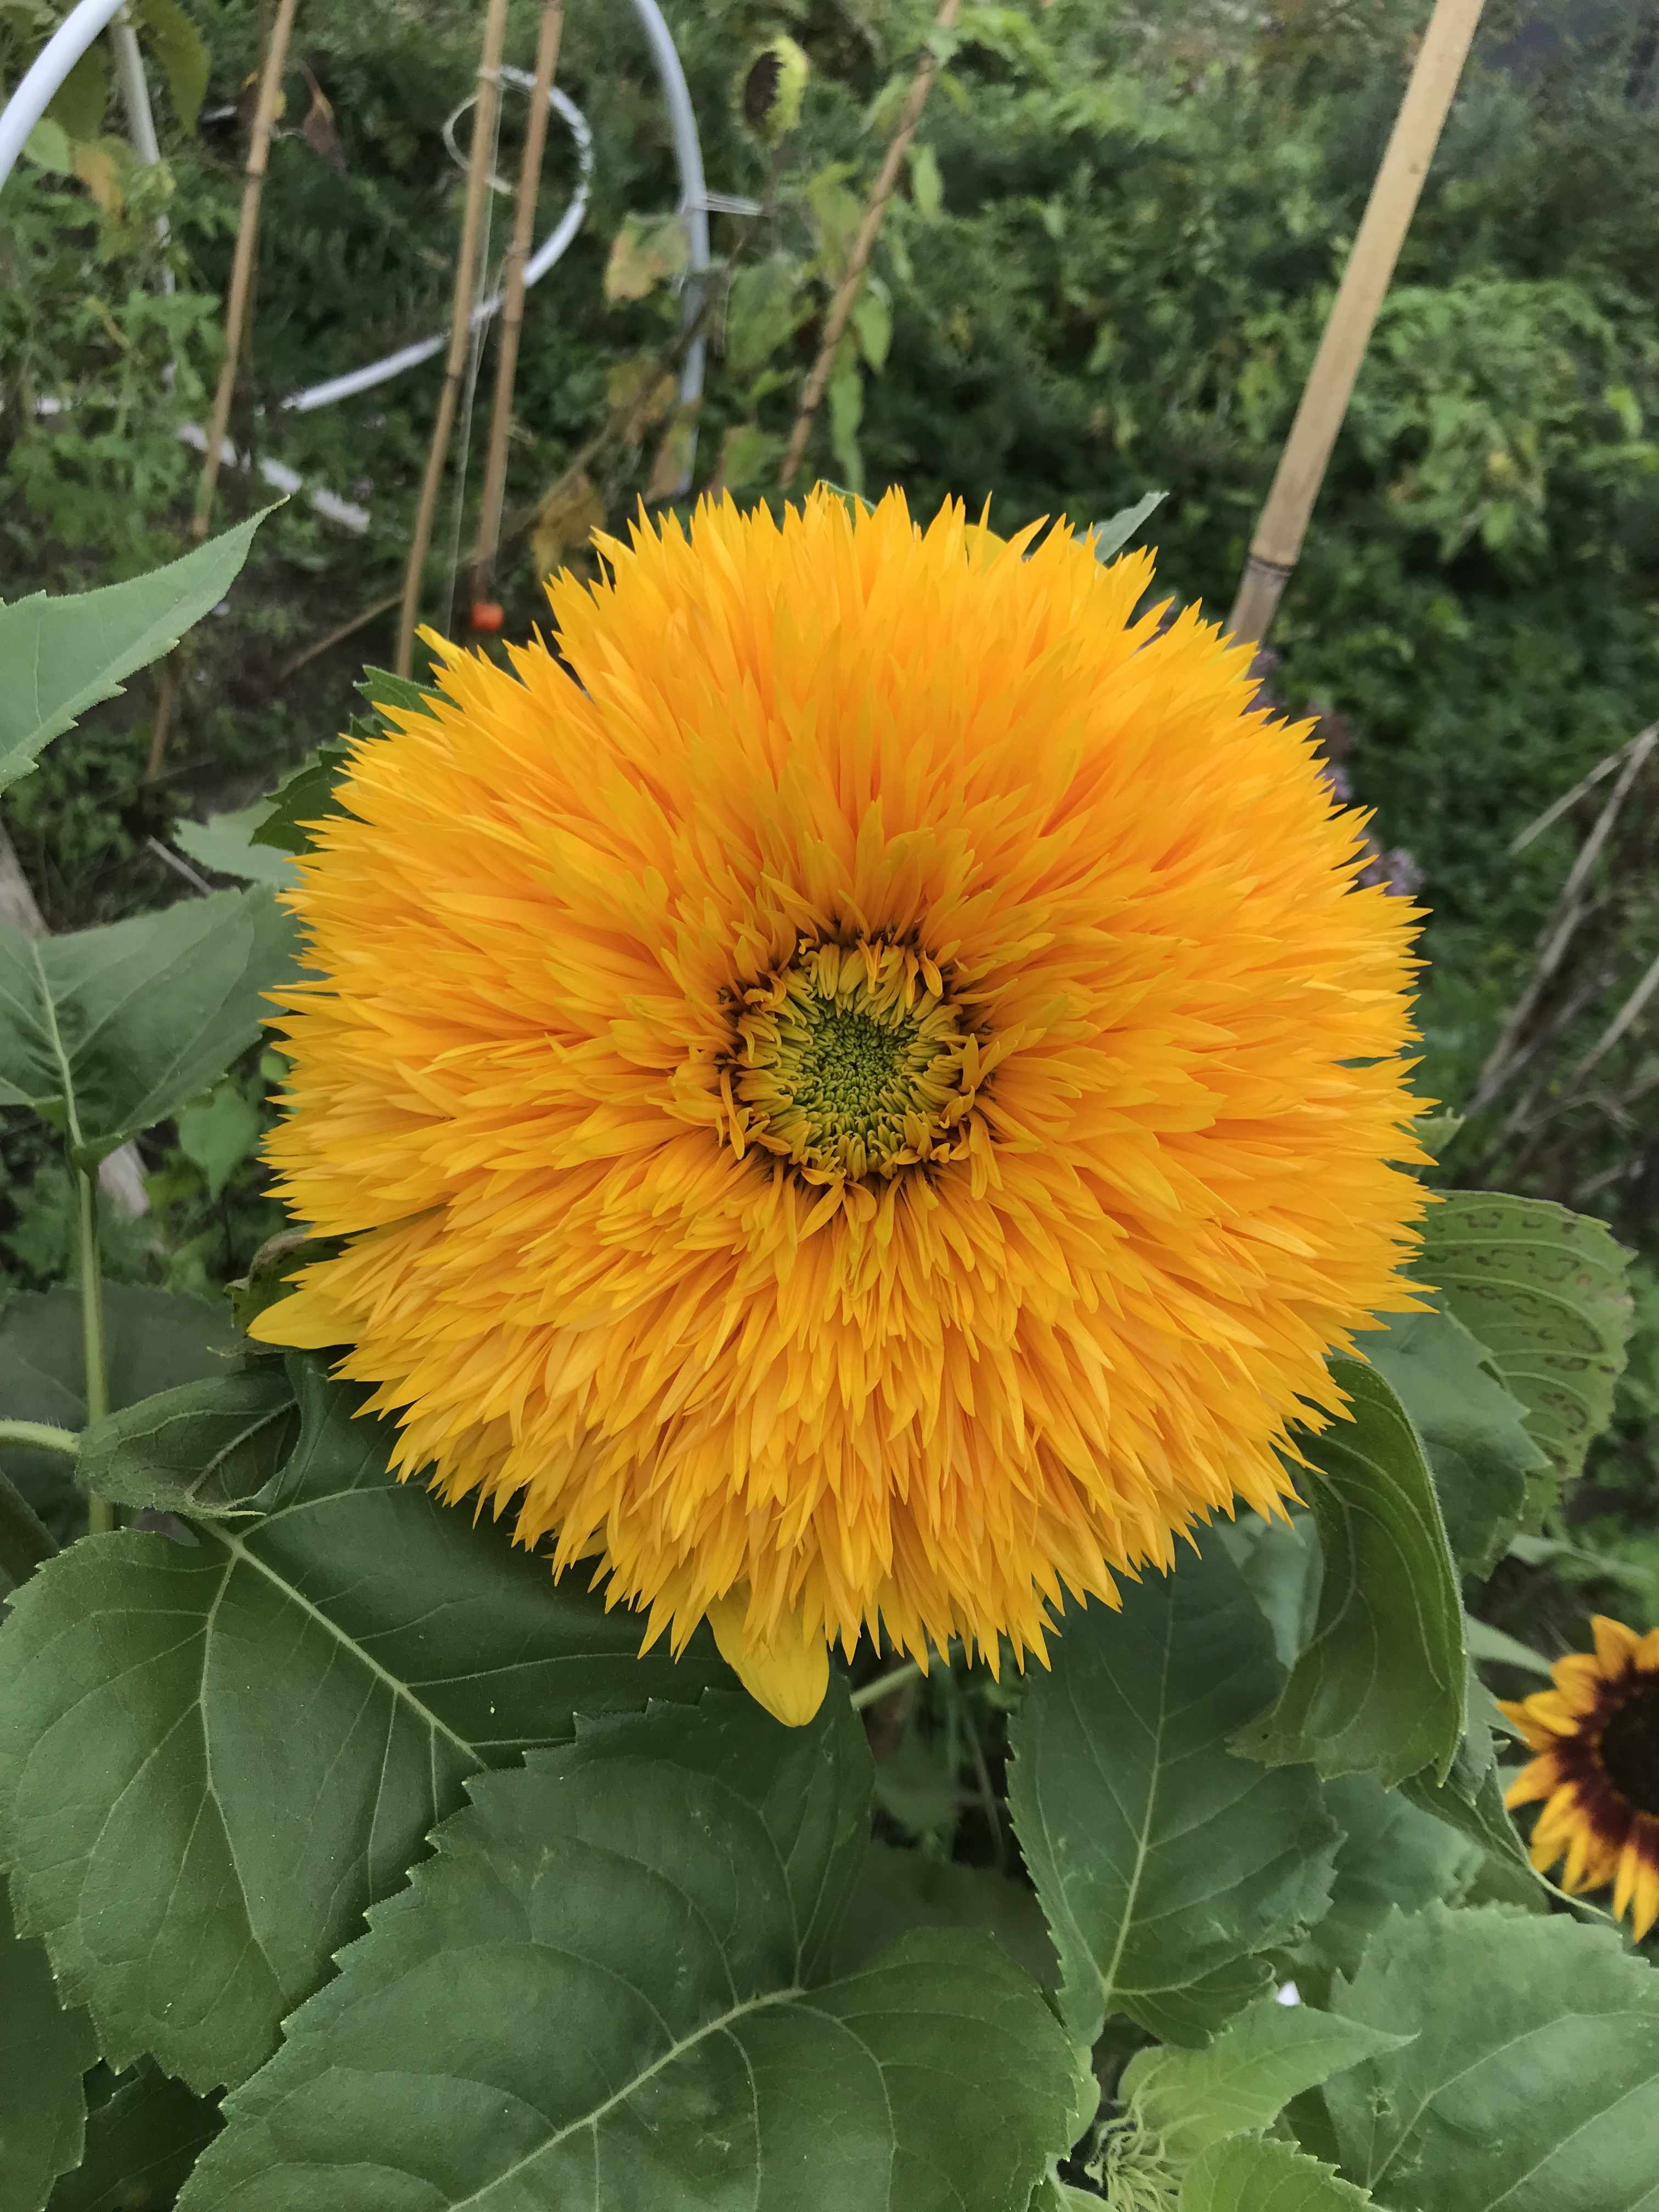 a sunflower the size of a dinner plate. instead of petals along the side and seeds in the middle, this sunflower has fuzzy petals all through its inside as if its a fluffy pillow rug